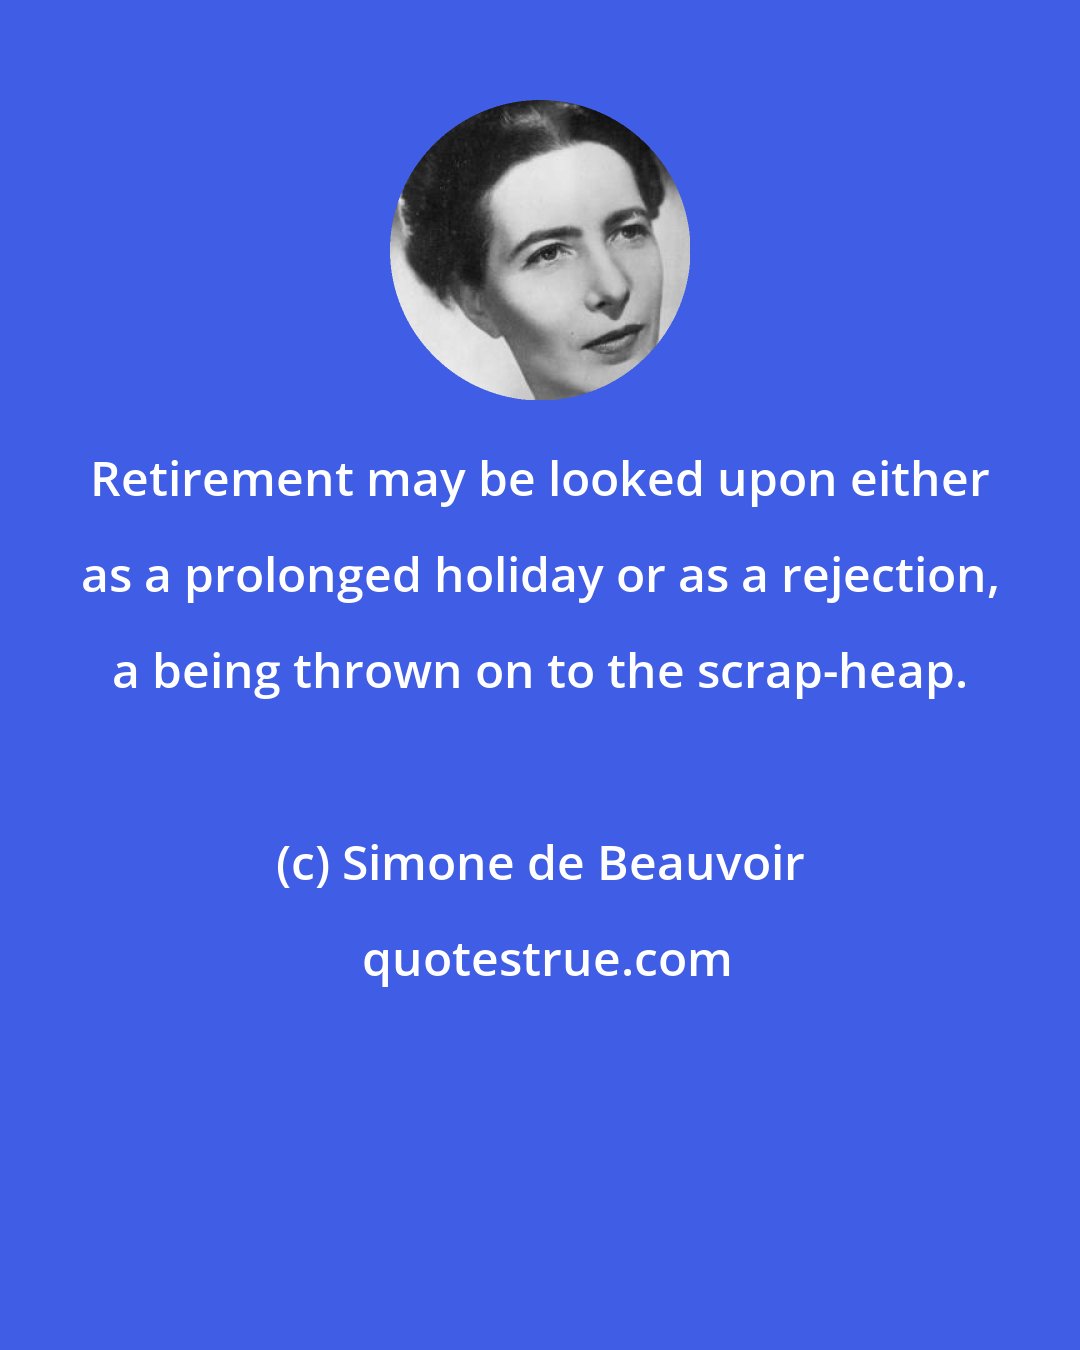 Simone de Beauvoir: Retirement may be looked upon either as a prolonged holiday or as a rejection, a being thrown on to the scrap-heap.